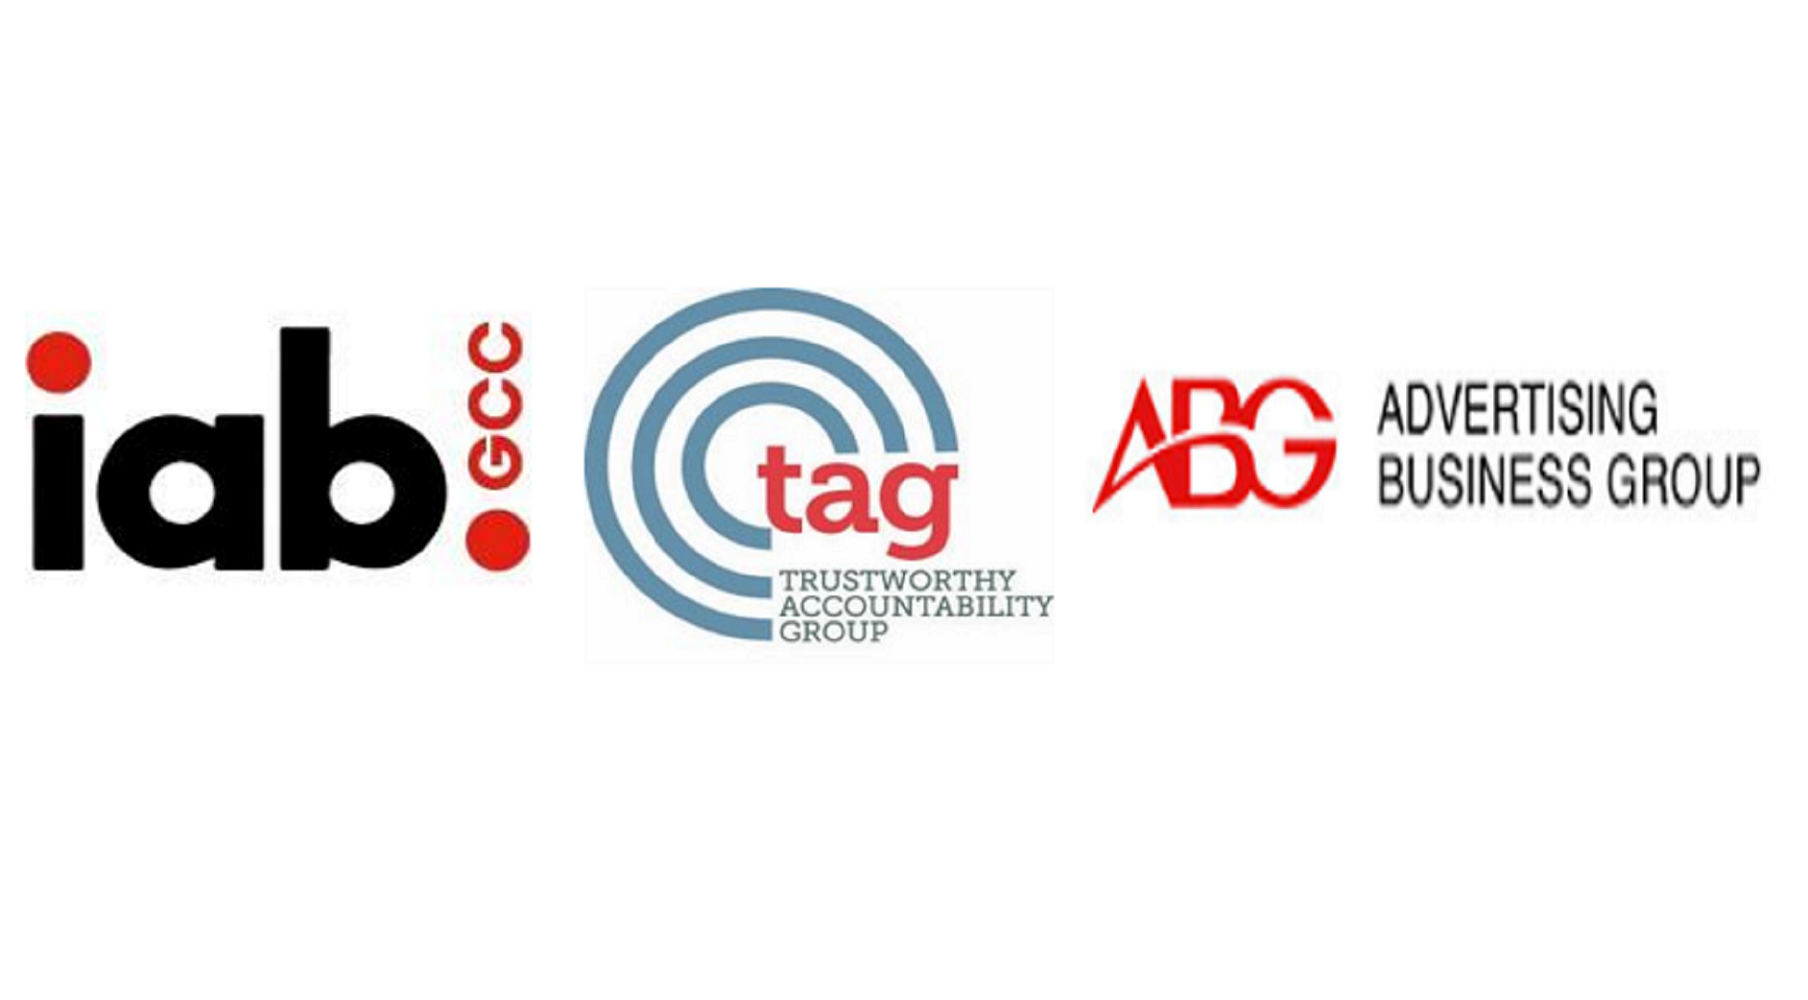 abg-iab-gcc-and-tag-launch-new-standards-to-fight-criminal-activity